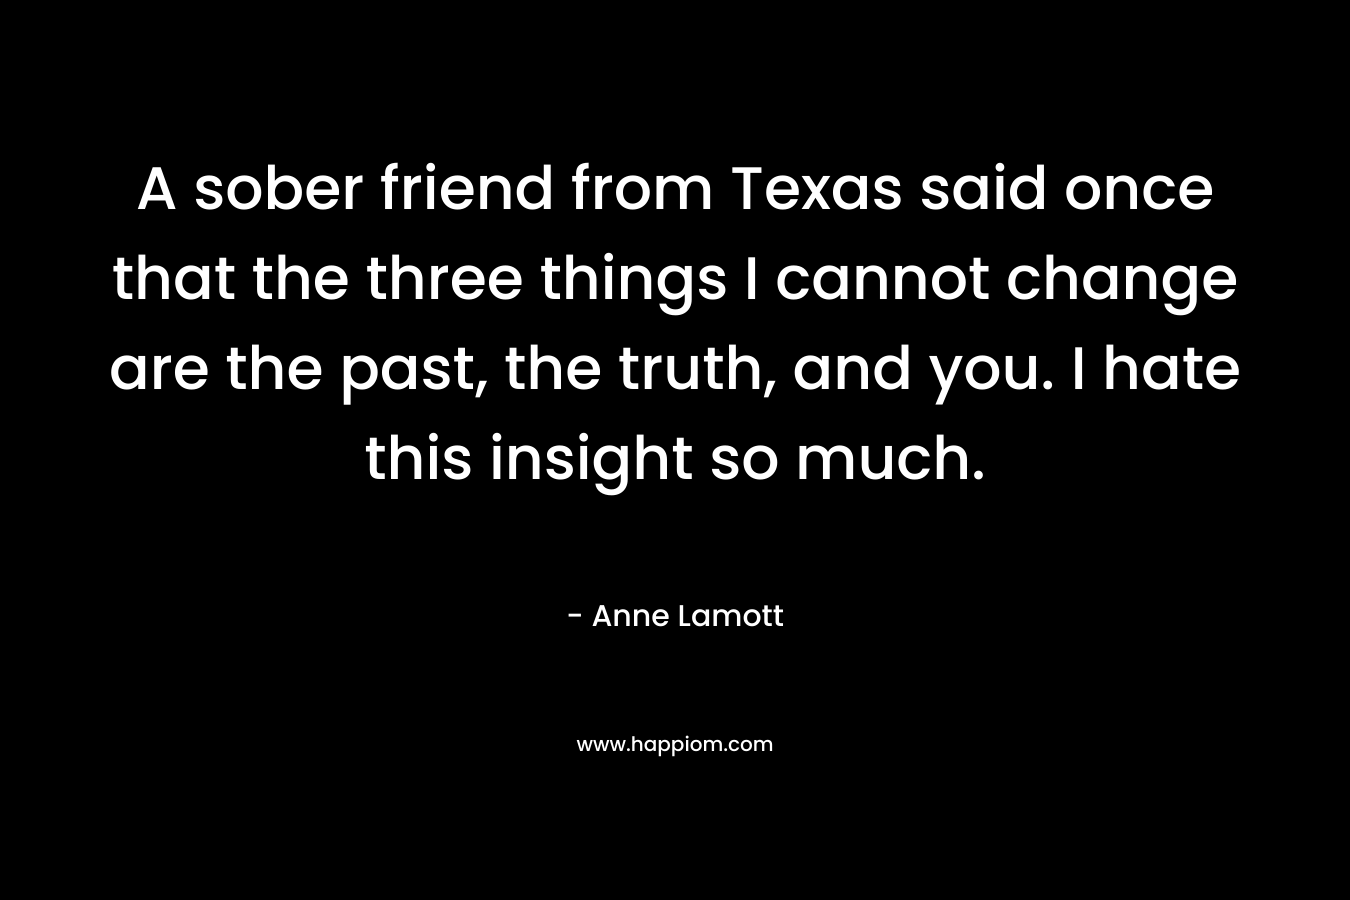 A sober friend from Texas said once that the three things I cannot change are the past, the truth, and you. I hate this insight so much.